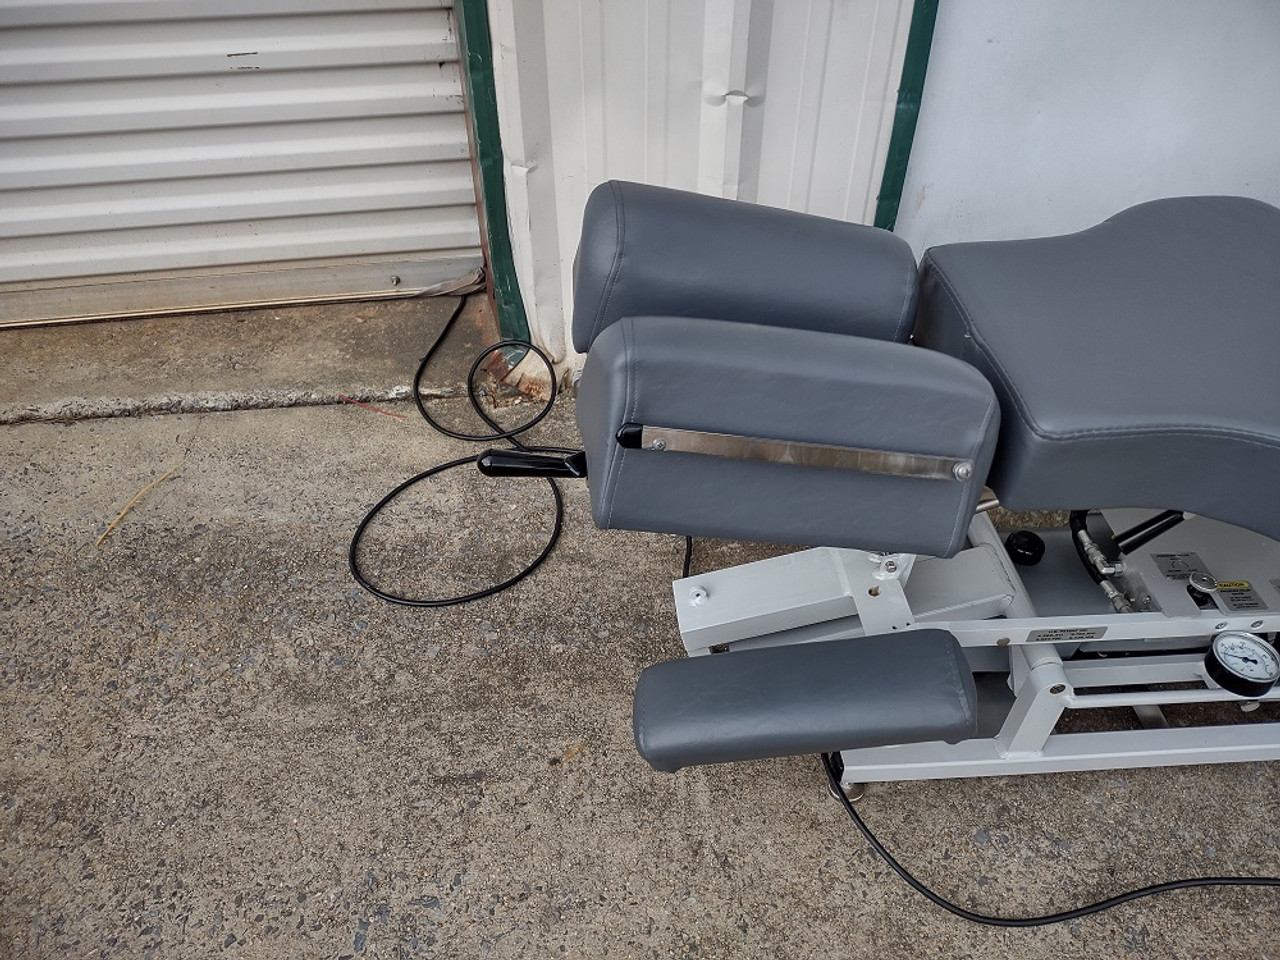 Looking for the BEST prices on a Used Lloyd 402 Manual Flexion Elevation Table with Deluxe Cervical & Pelvic Drop,Used Lloyd 402 Manual Flexion Elevation Table?